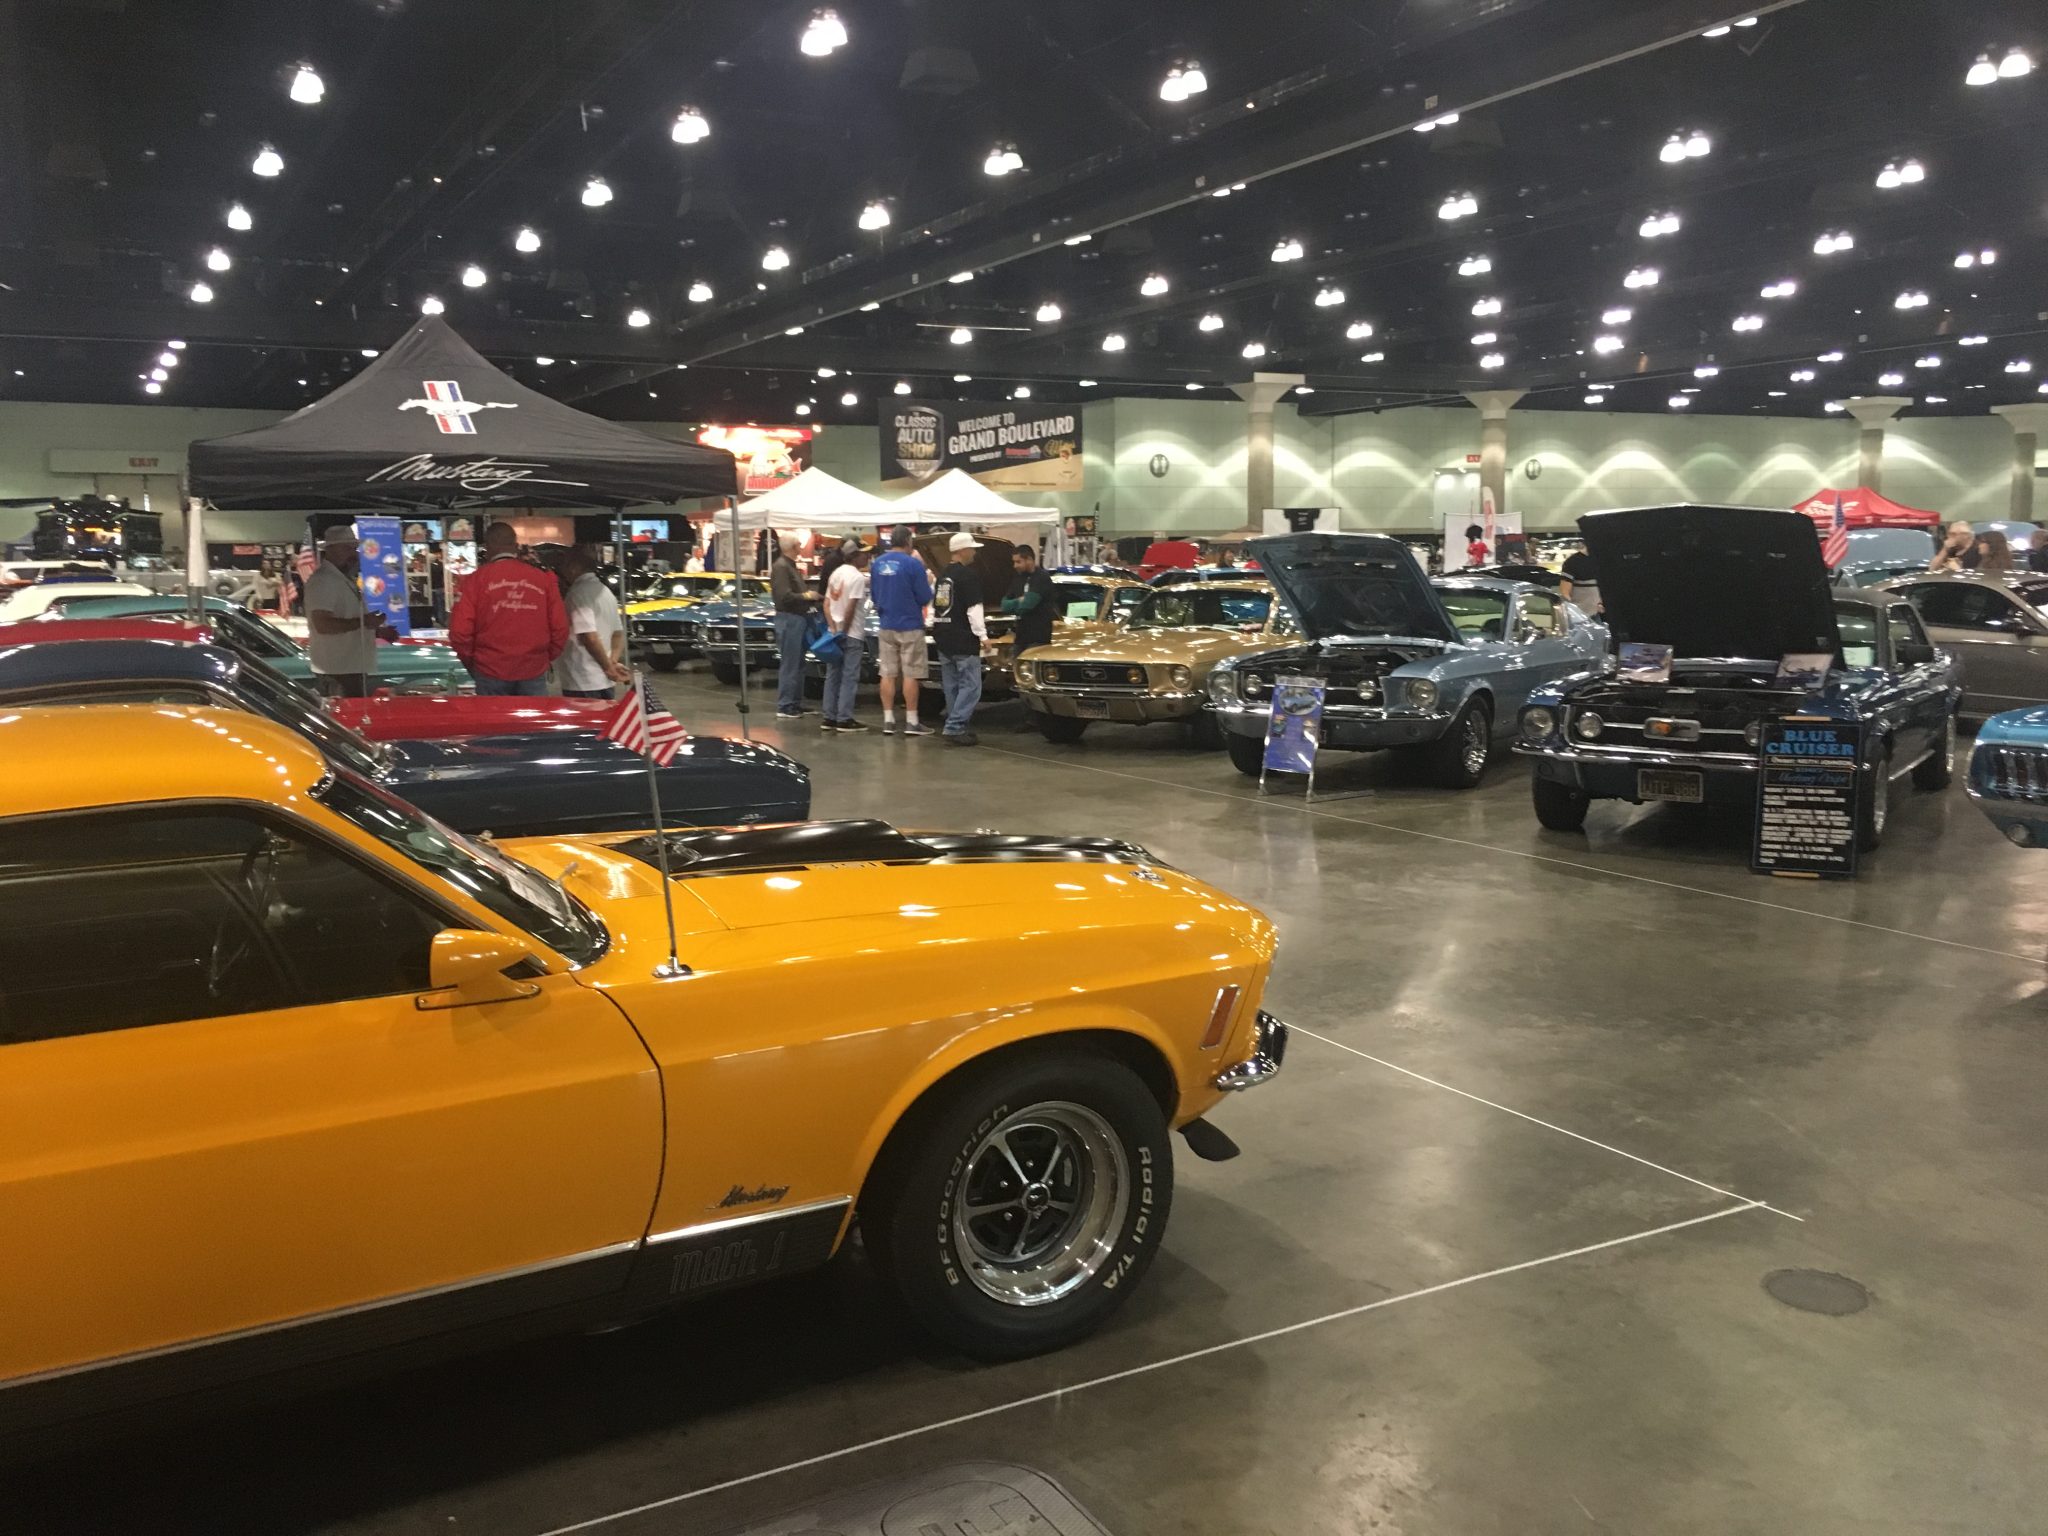 Mustang alley, with around 20 immaculate examples of the original pony car from across the decades on show.